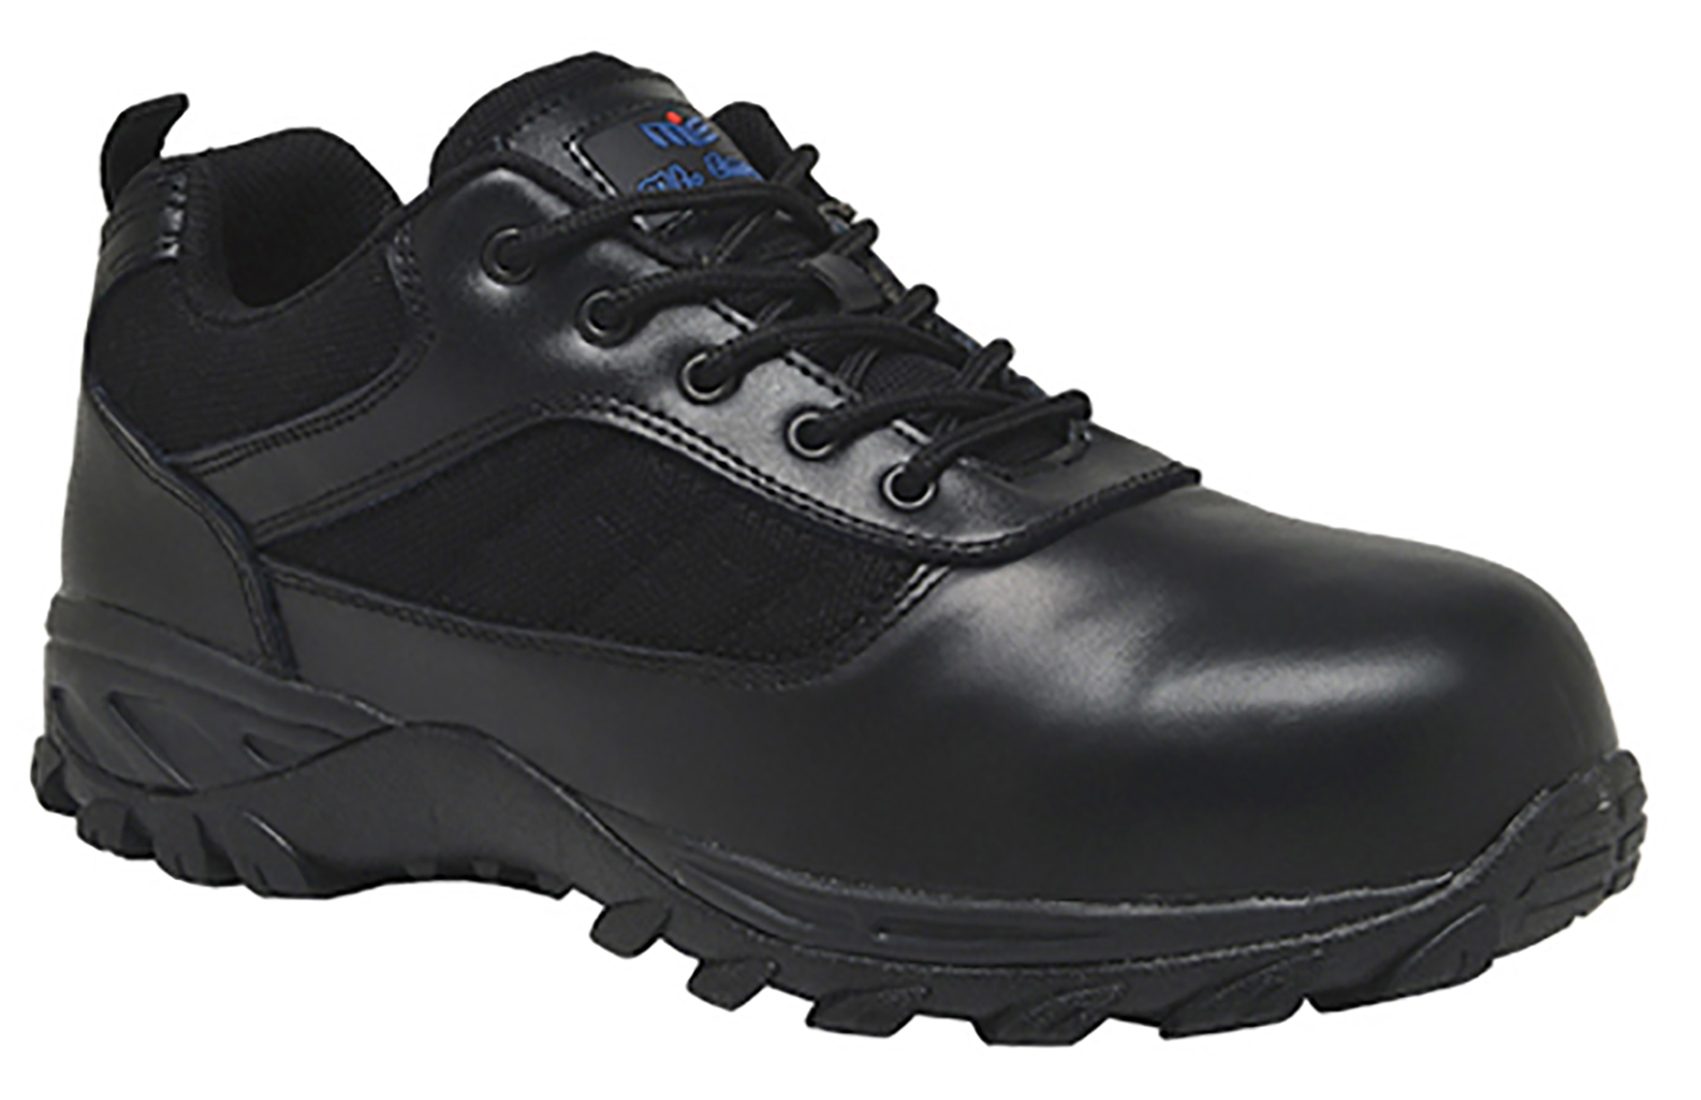 work shoes for men composite toe